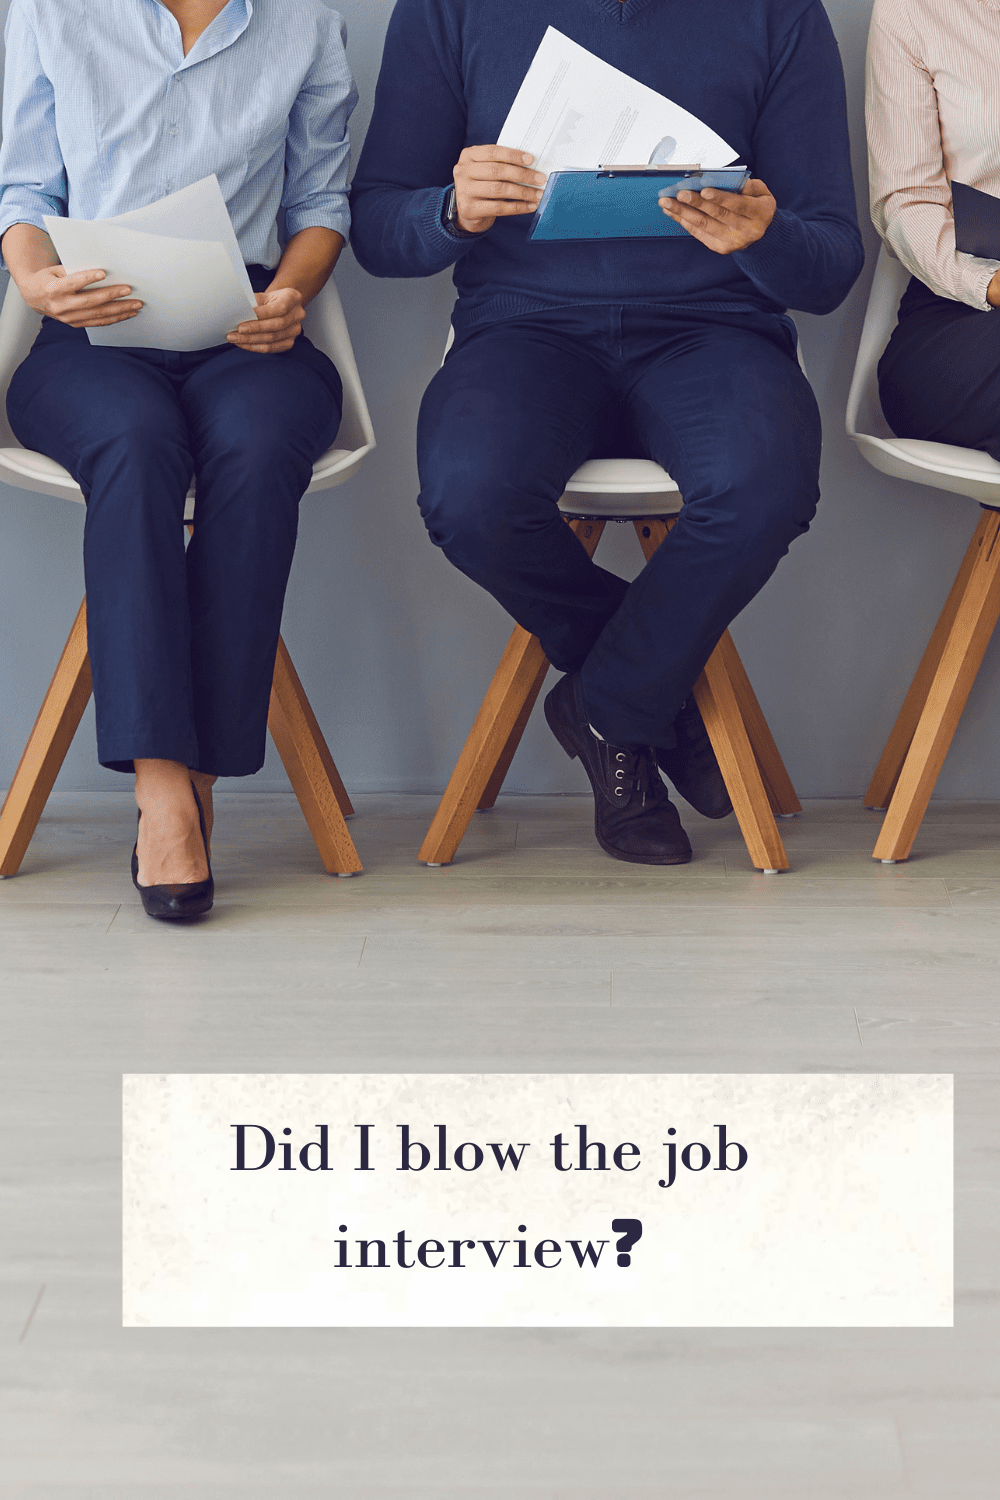 Did I blow the job interview?